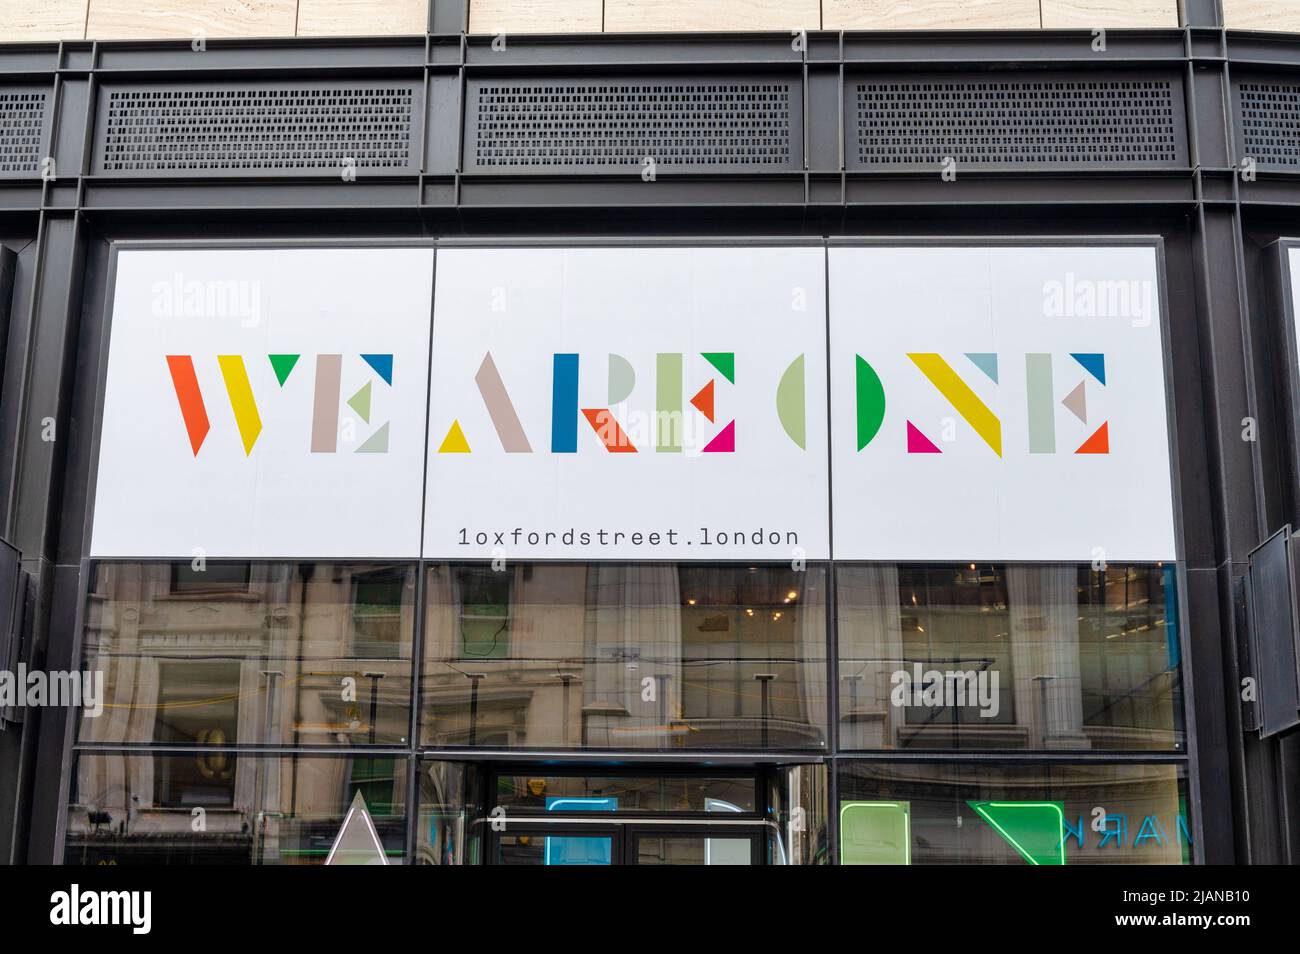 London, UK- May 3, 2022: The sign for the We Are One retail building on Oxford street  in London Stock Photo